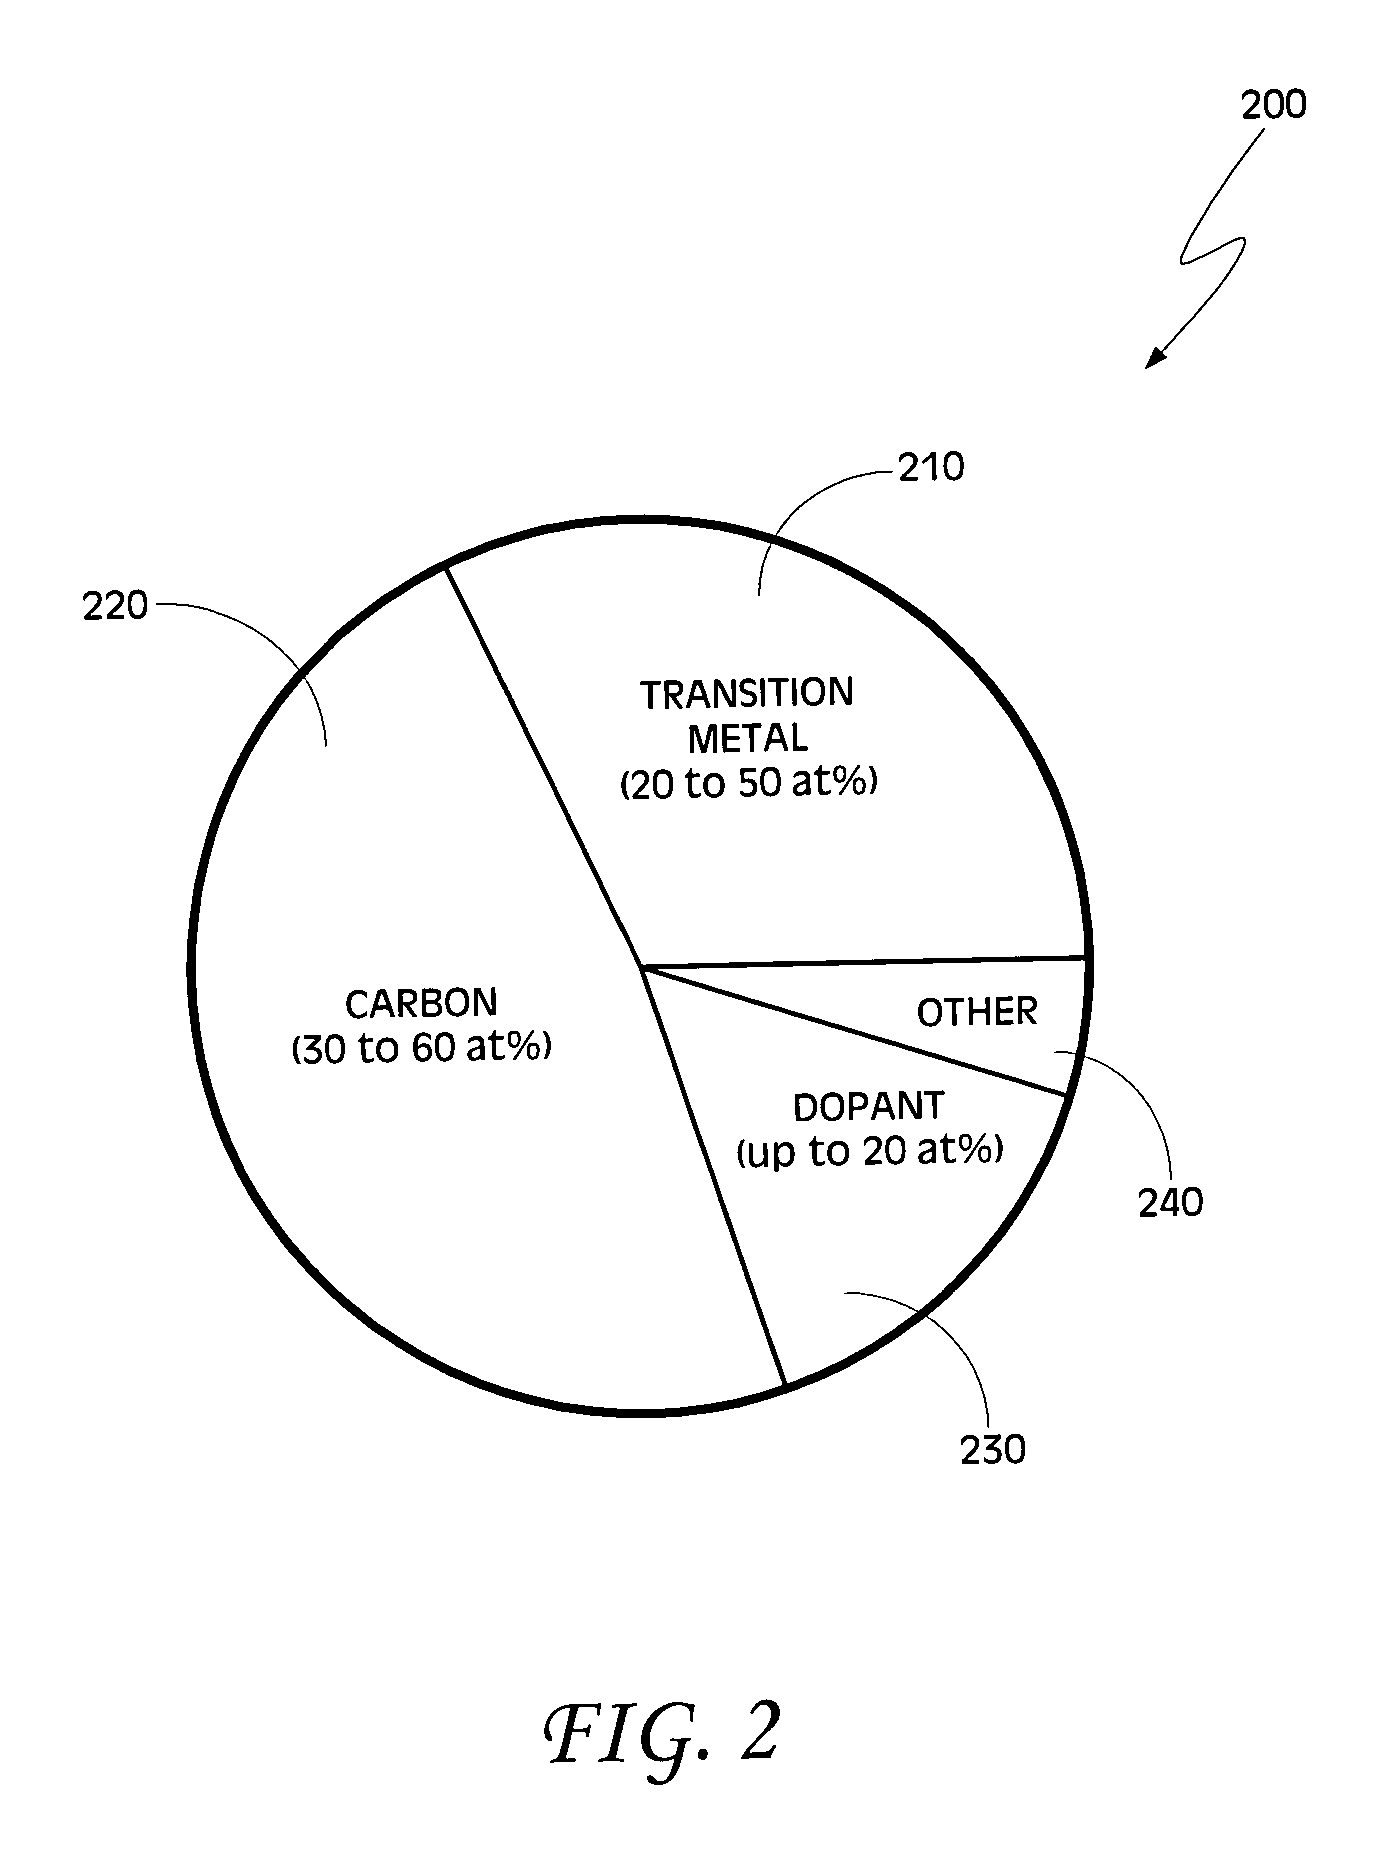 Transition metal alloys for use as a gate electrode and devices incorporating these alloys